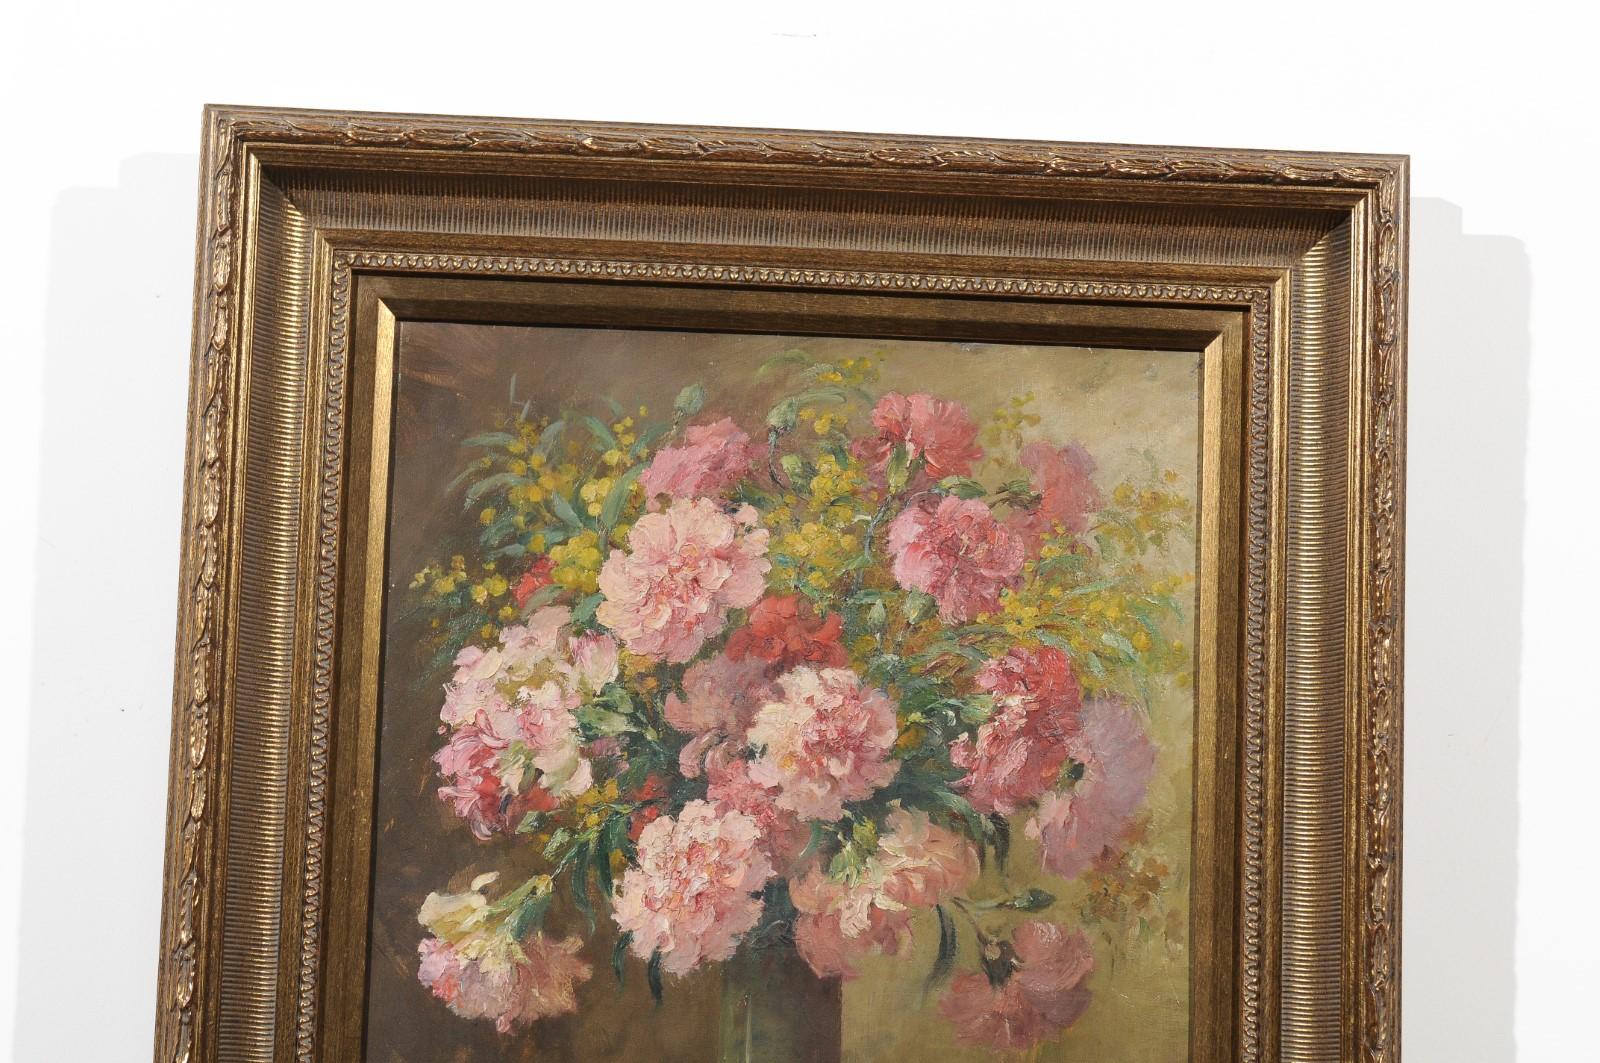 Giltwood French 19th Century Framed Oil on Canvas Still-Life Painting with Pink Bouquet